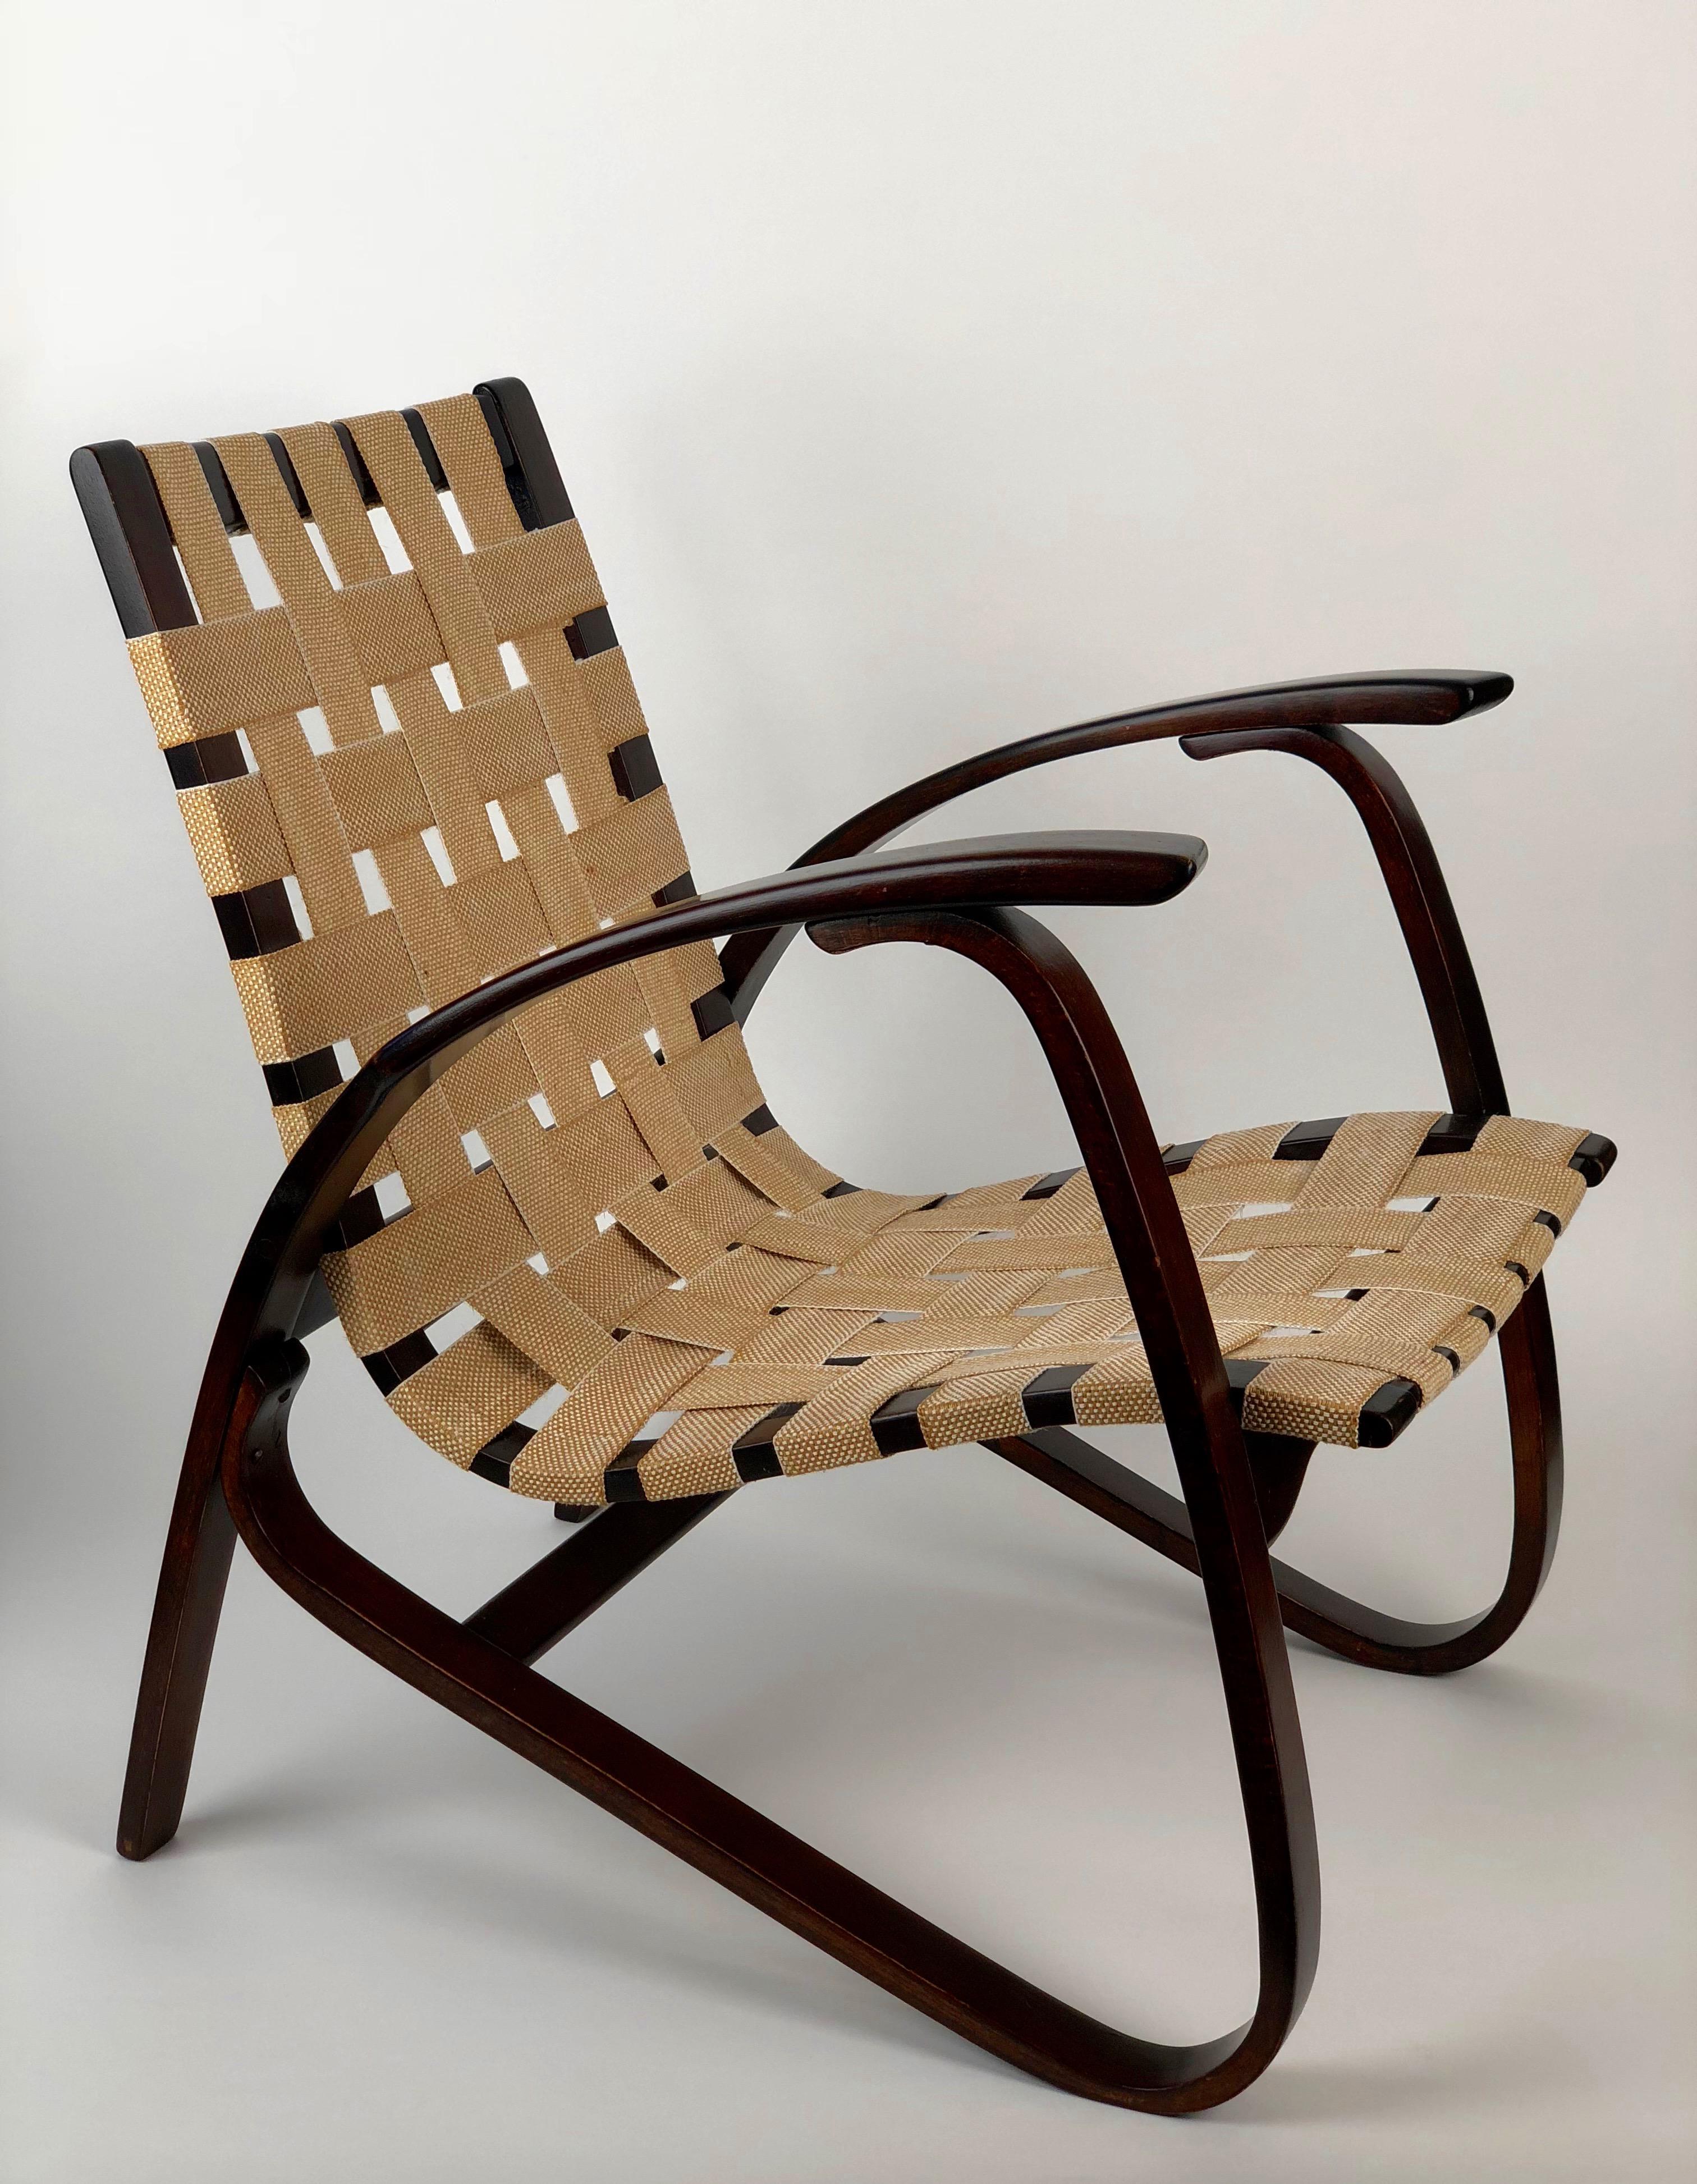 1930s bentwood armchair designed by Jan Vanek for UP Zavody. The frame is made up of steamed beechwood that has been formed into curved elements. After it's assembly it was stained brown and then the construction was finalized with webbing. At some